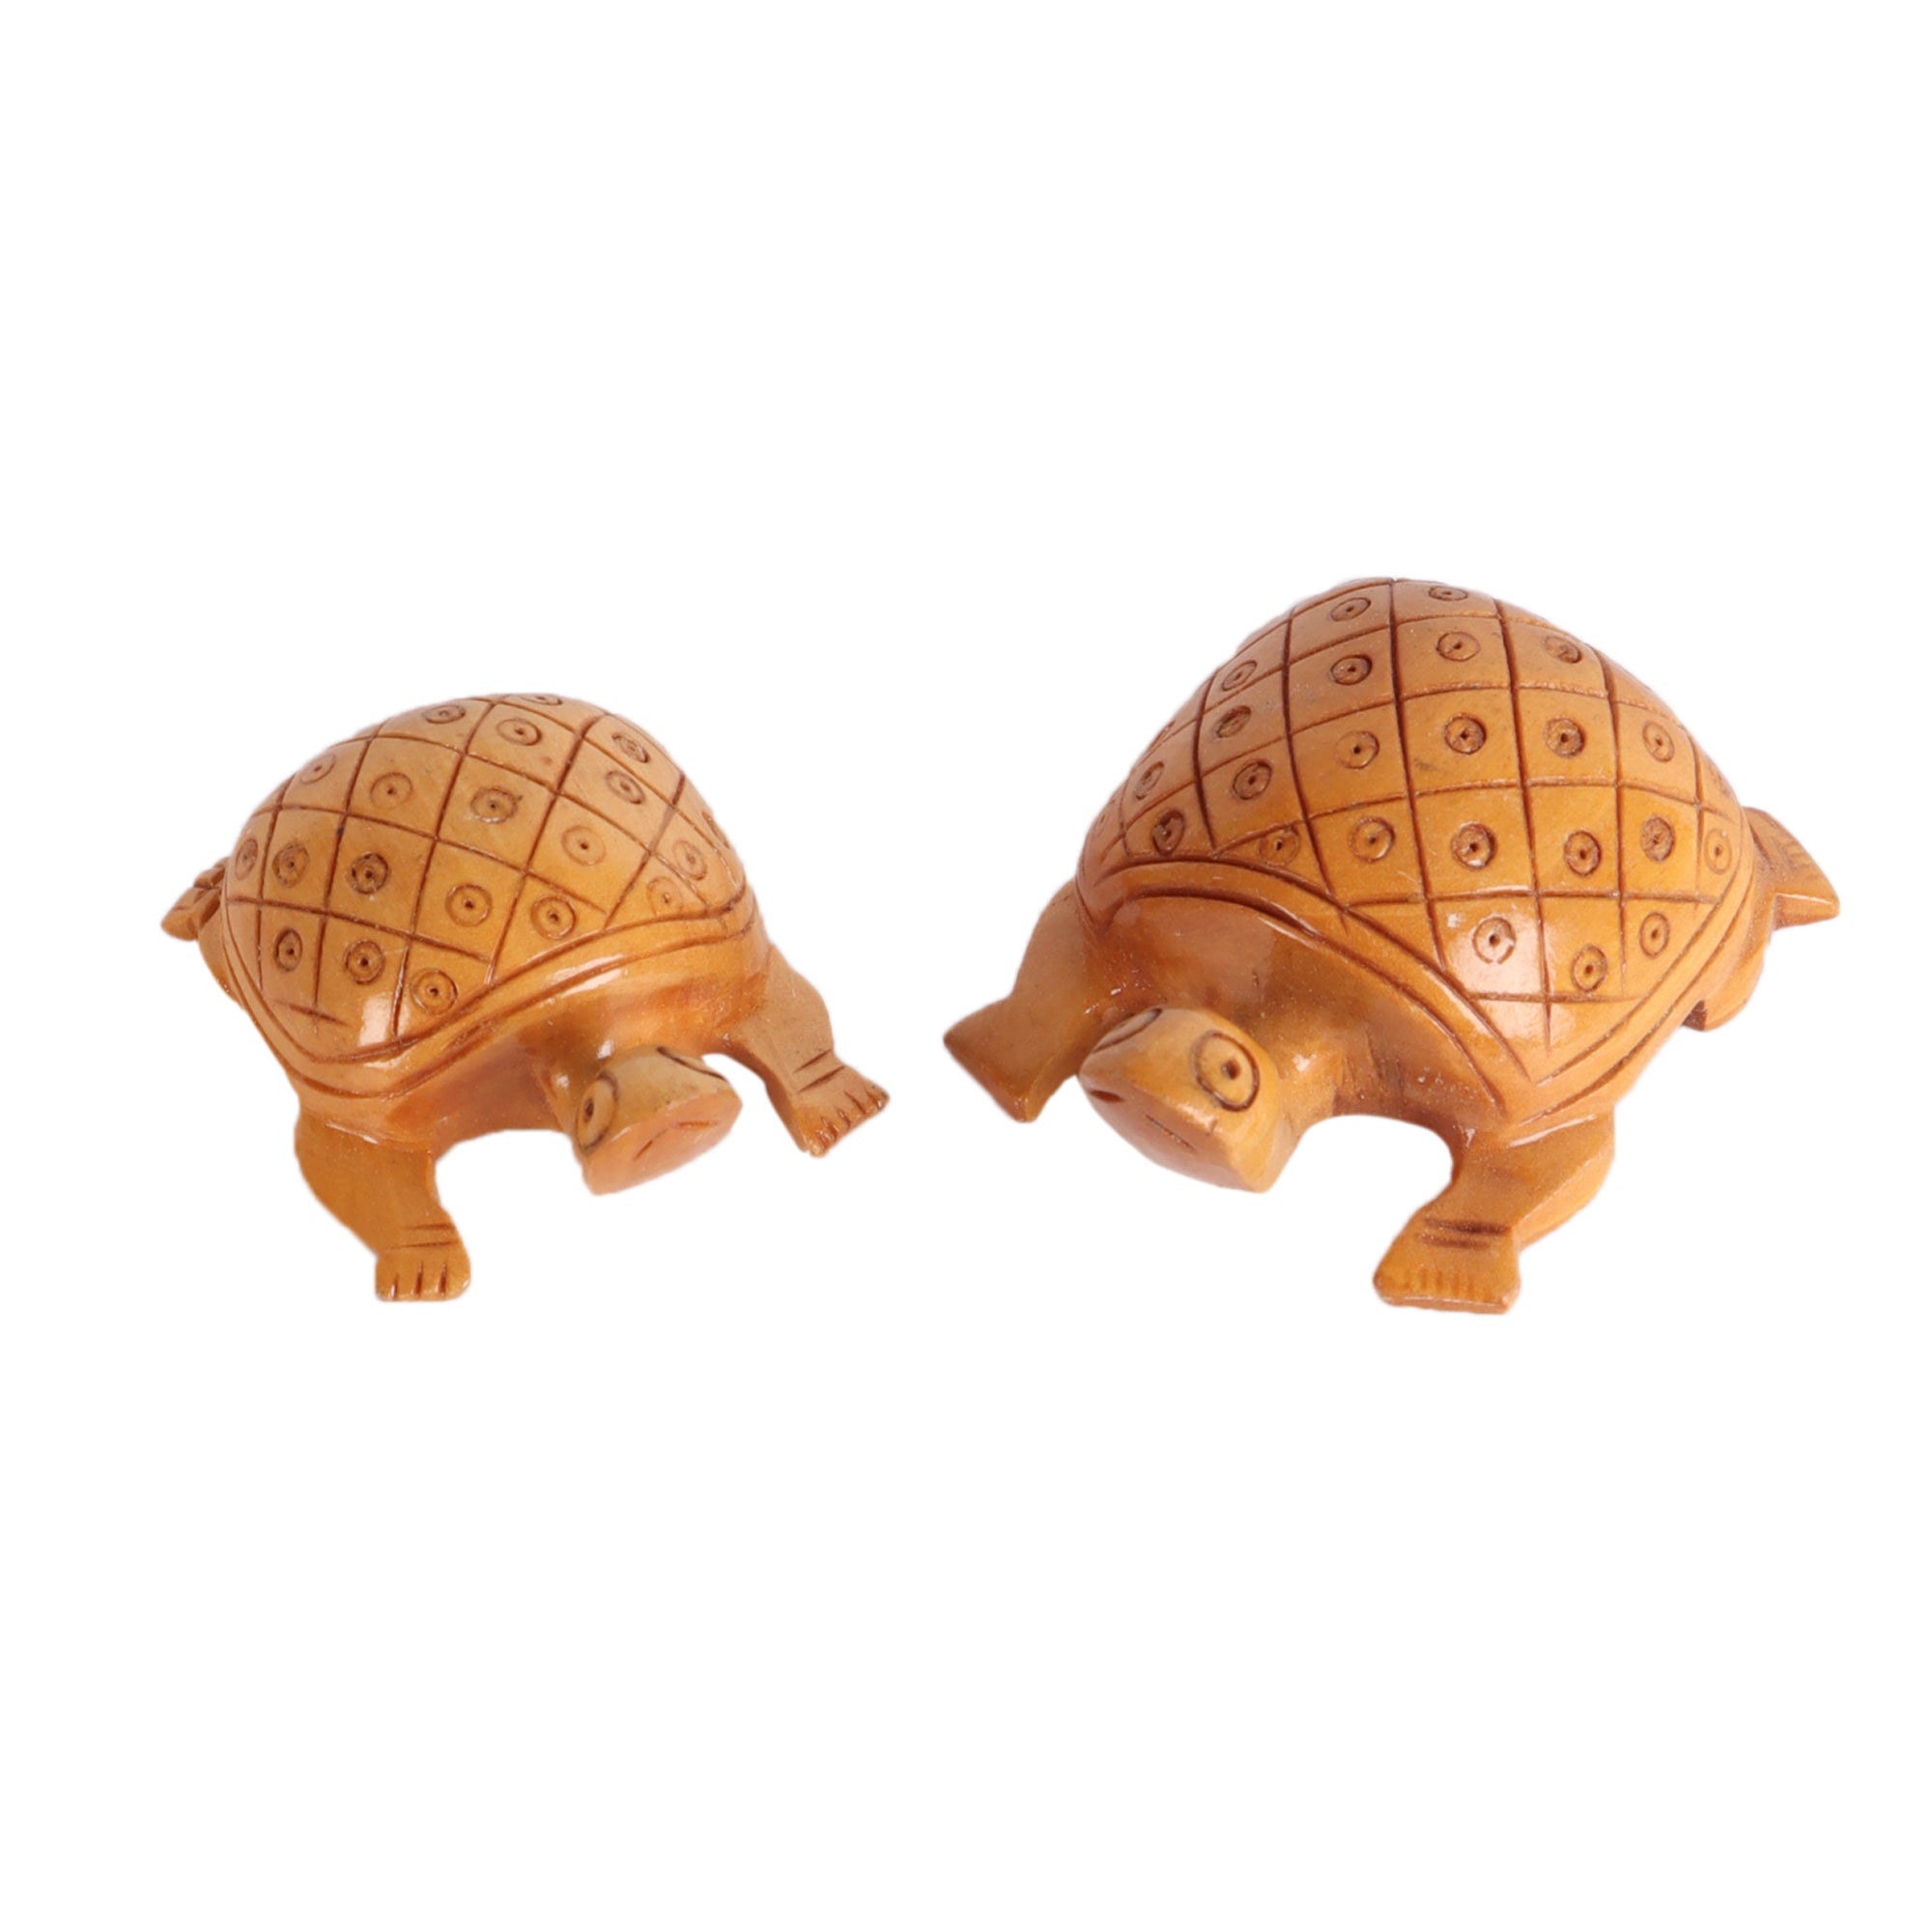 A Bale of Turtles (Set of 5)3